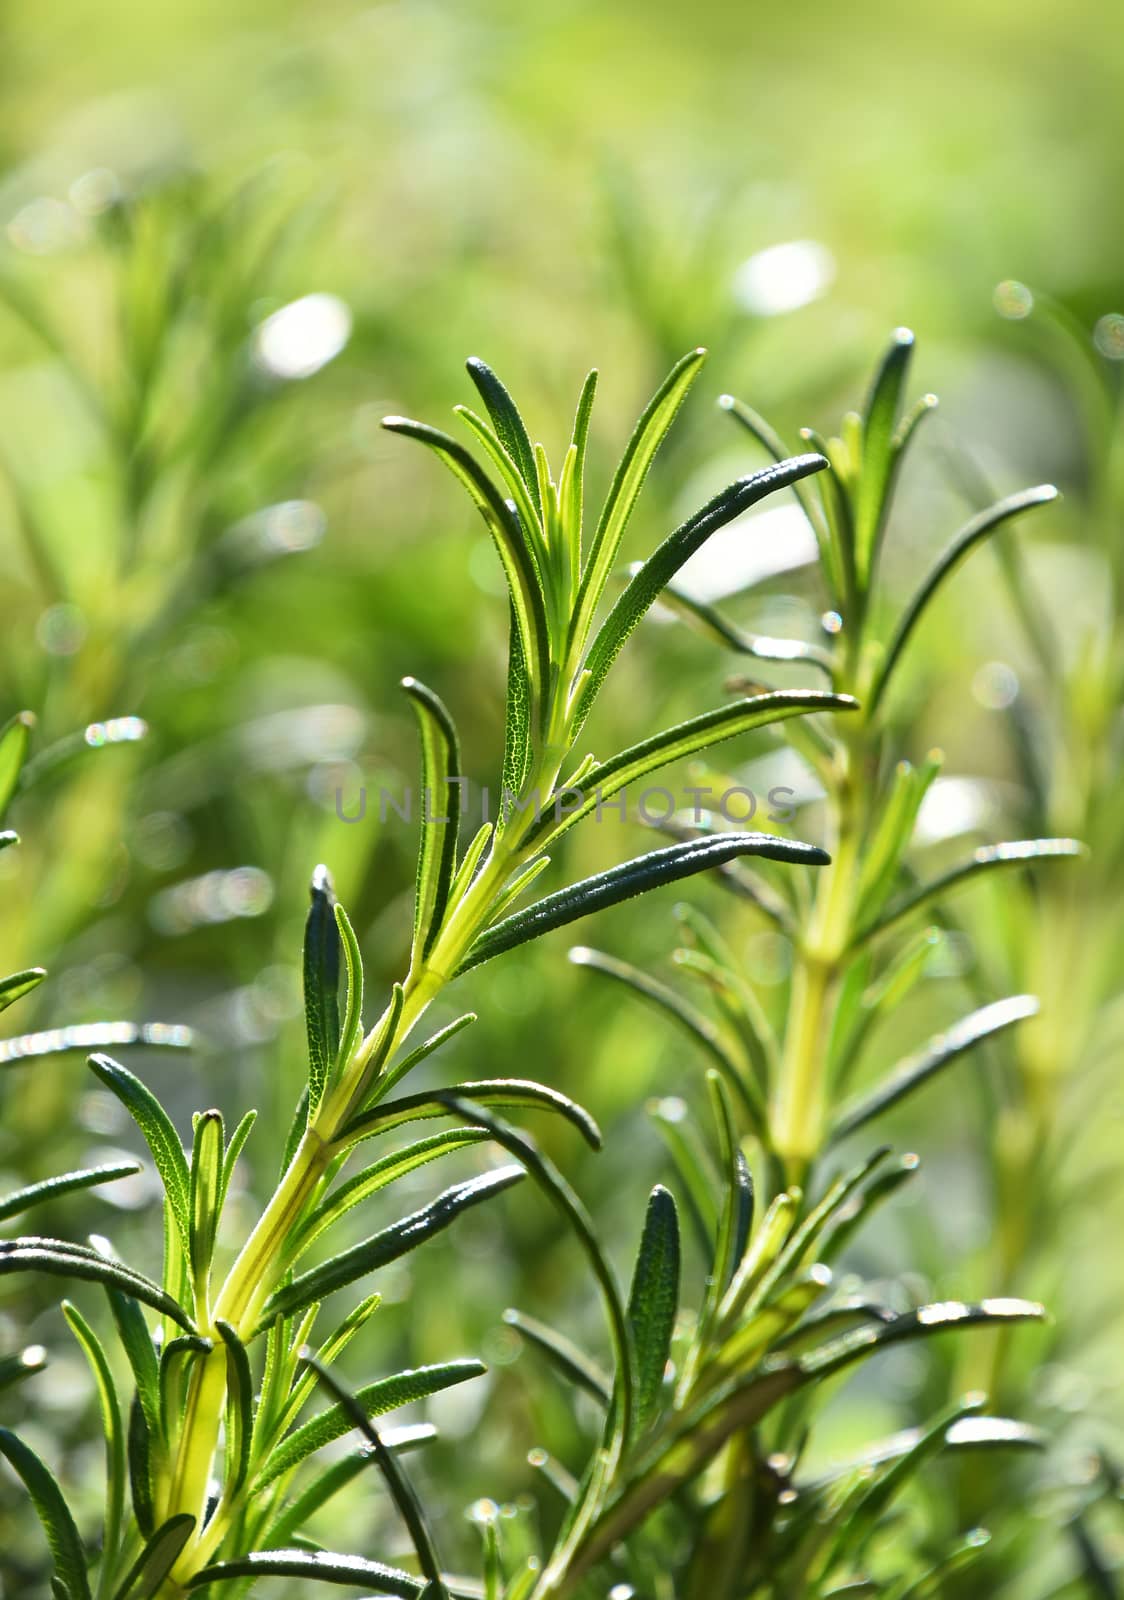 Close up green fresh rosemary spicy herb (Rosmarinus officinalis) sprouts growing under bright sunshine